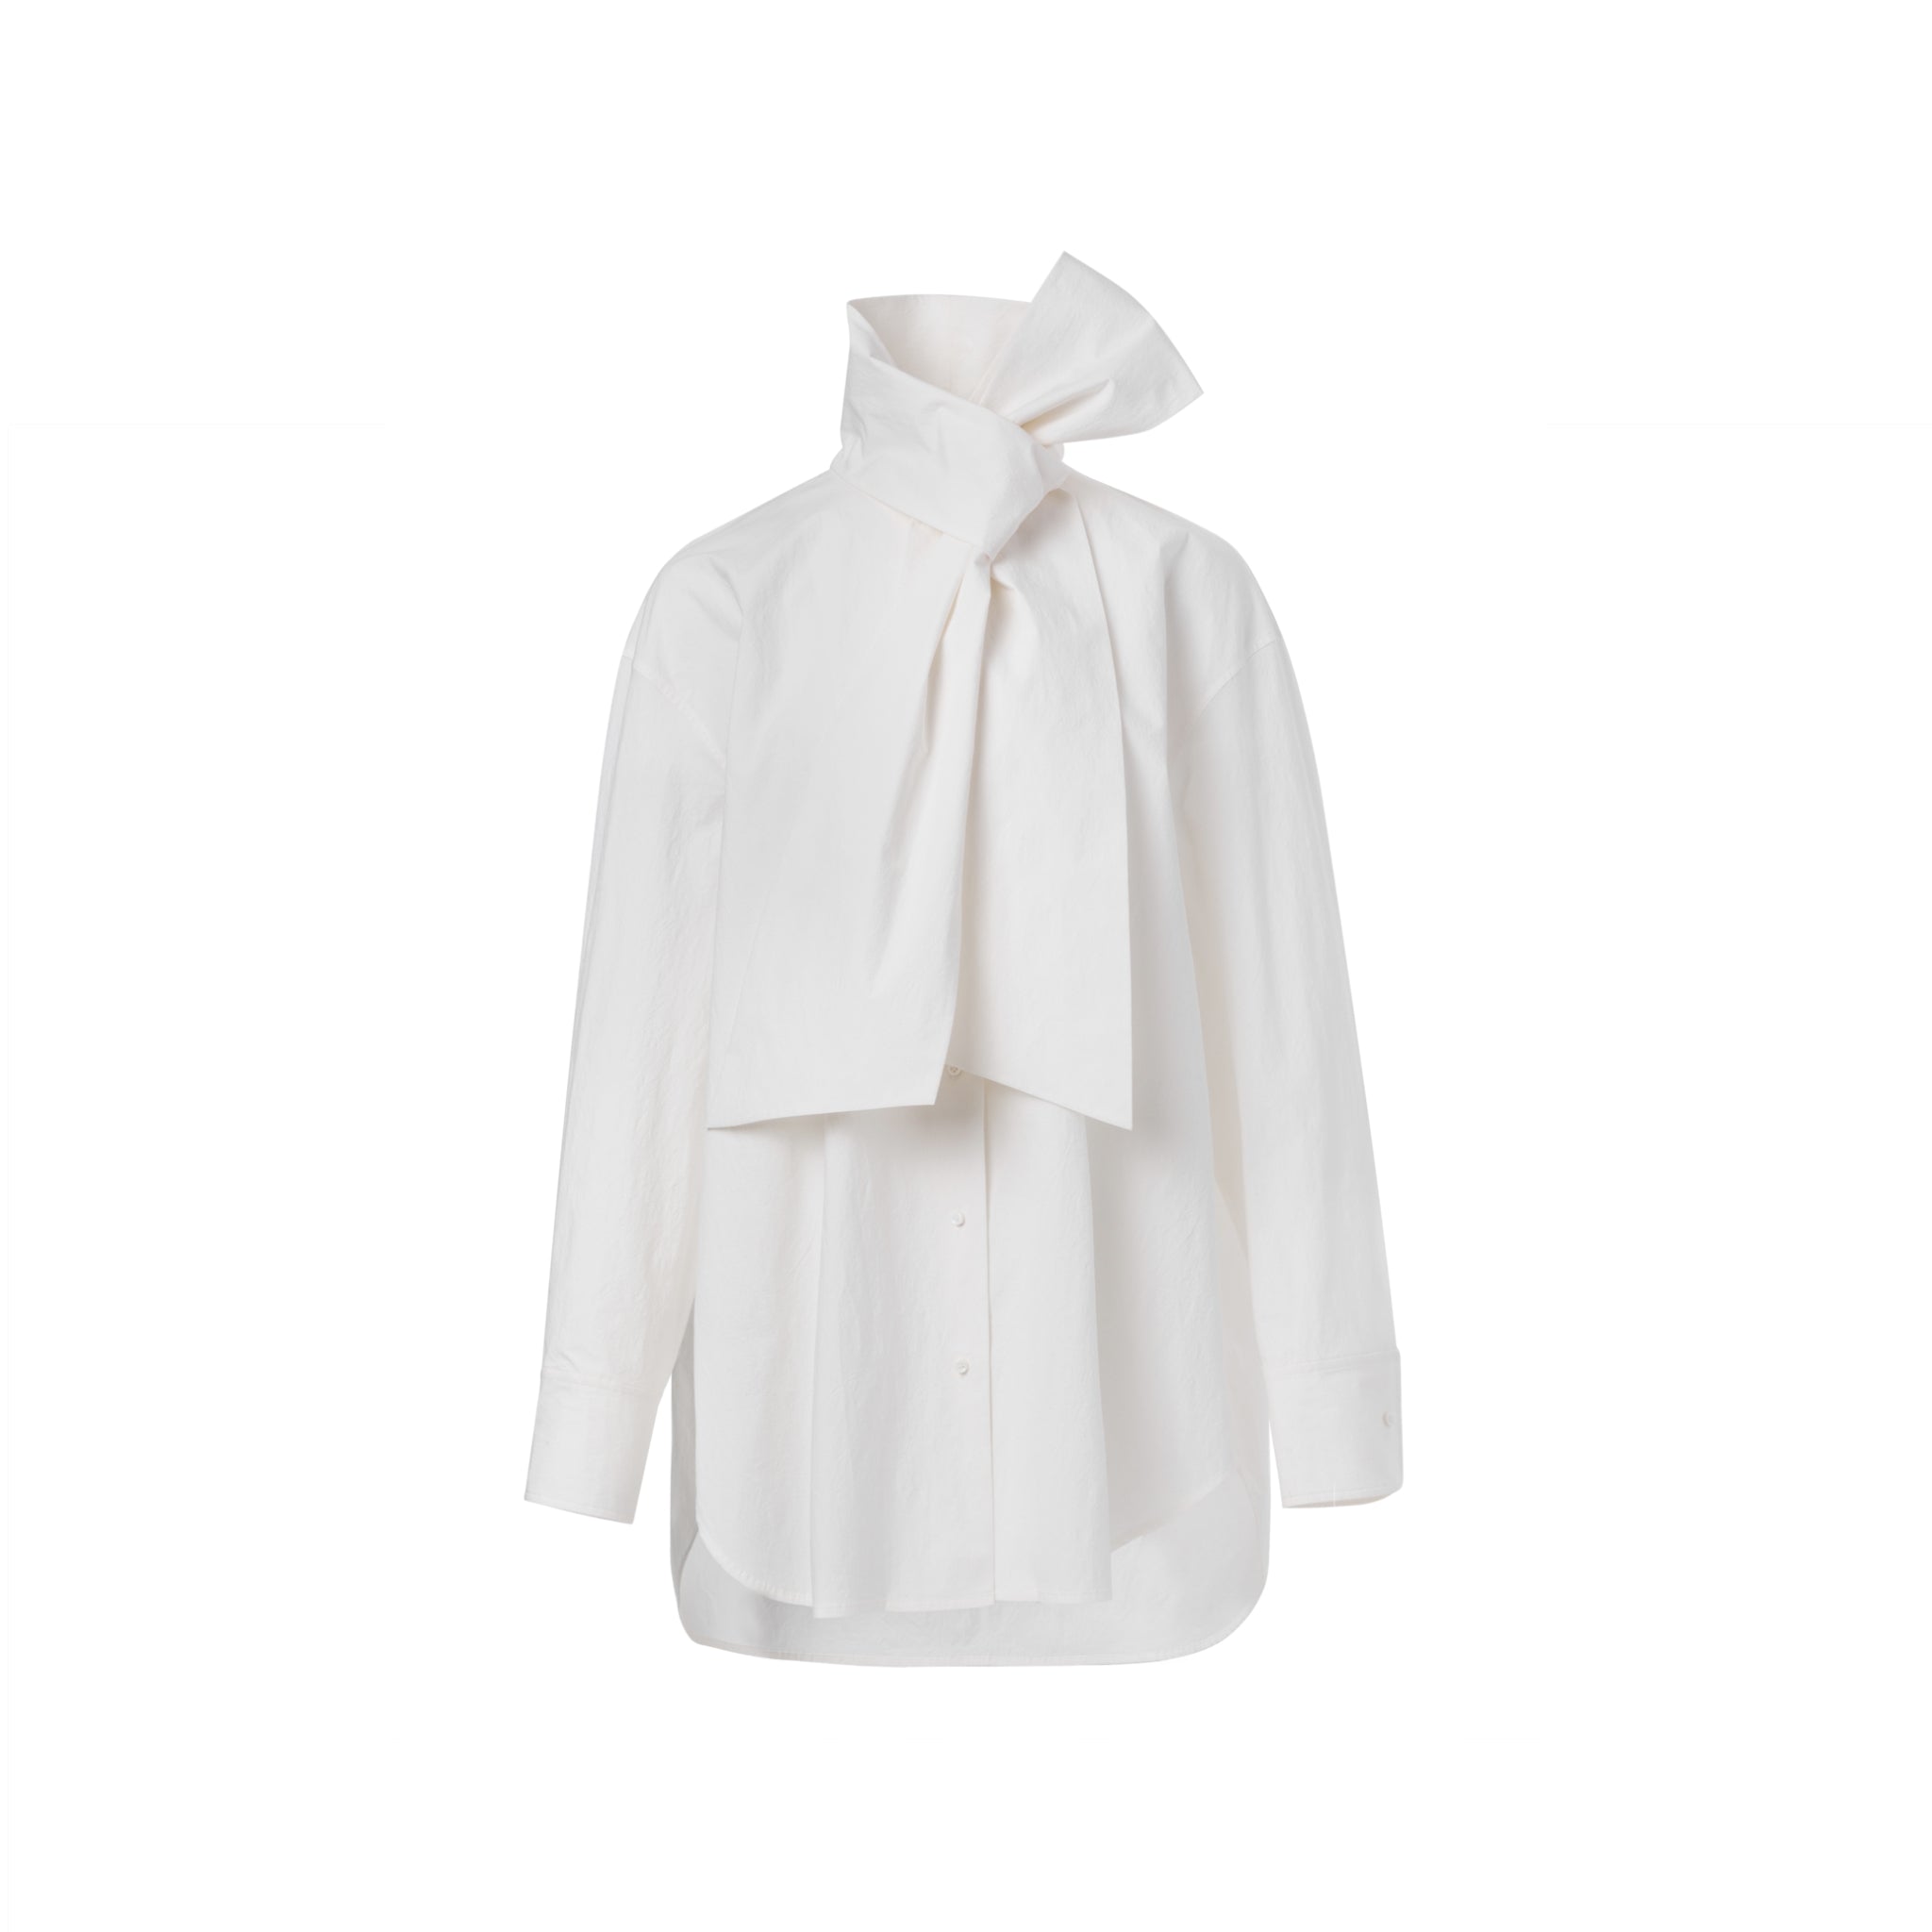 Ther. White Necktie loose fit shirt | MADA IN CHINA